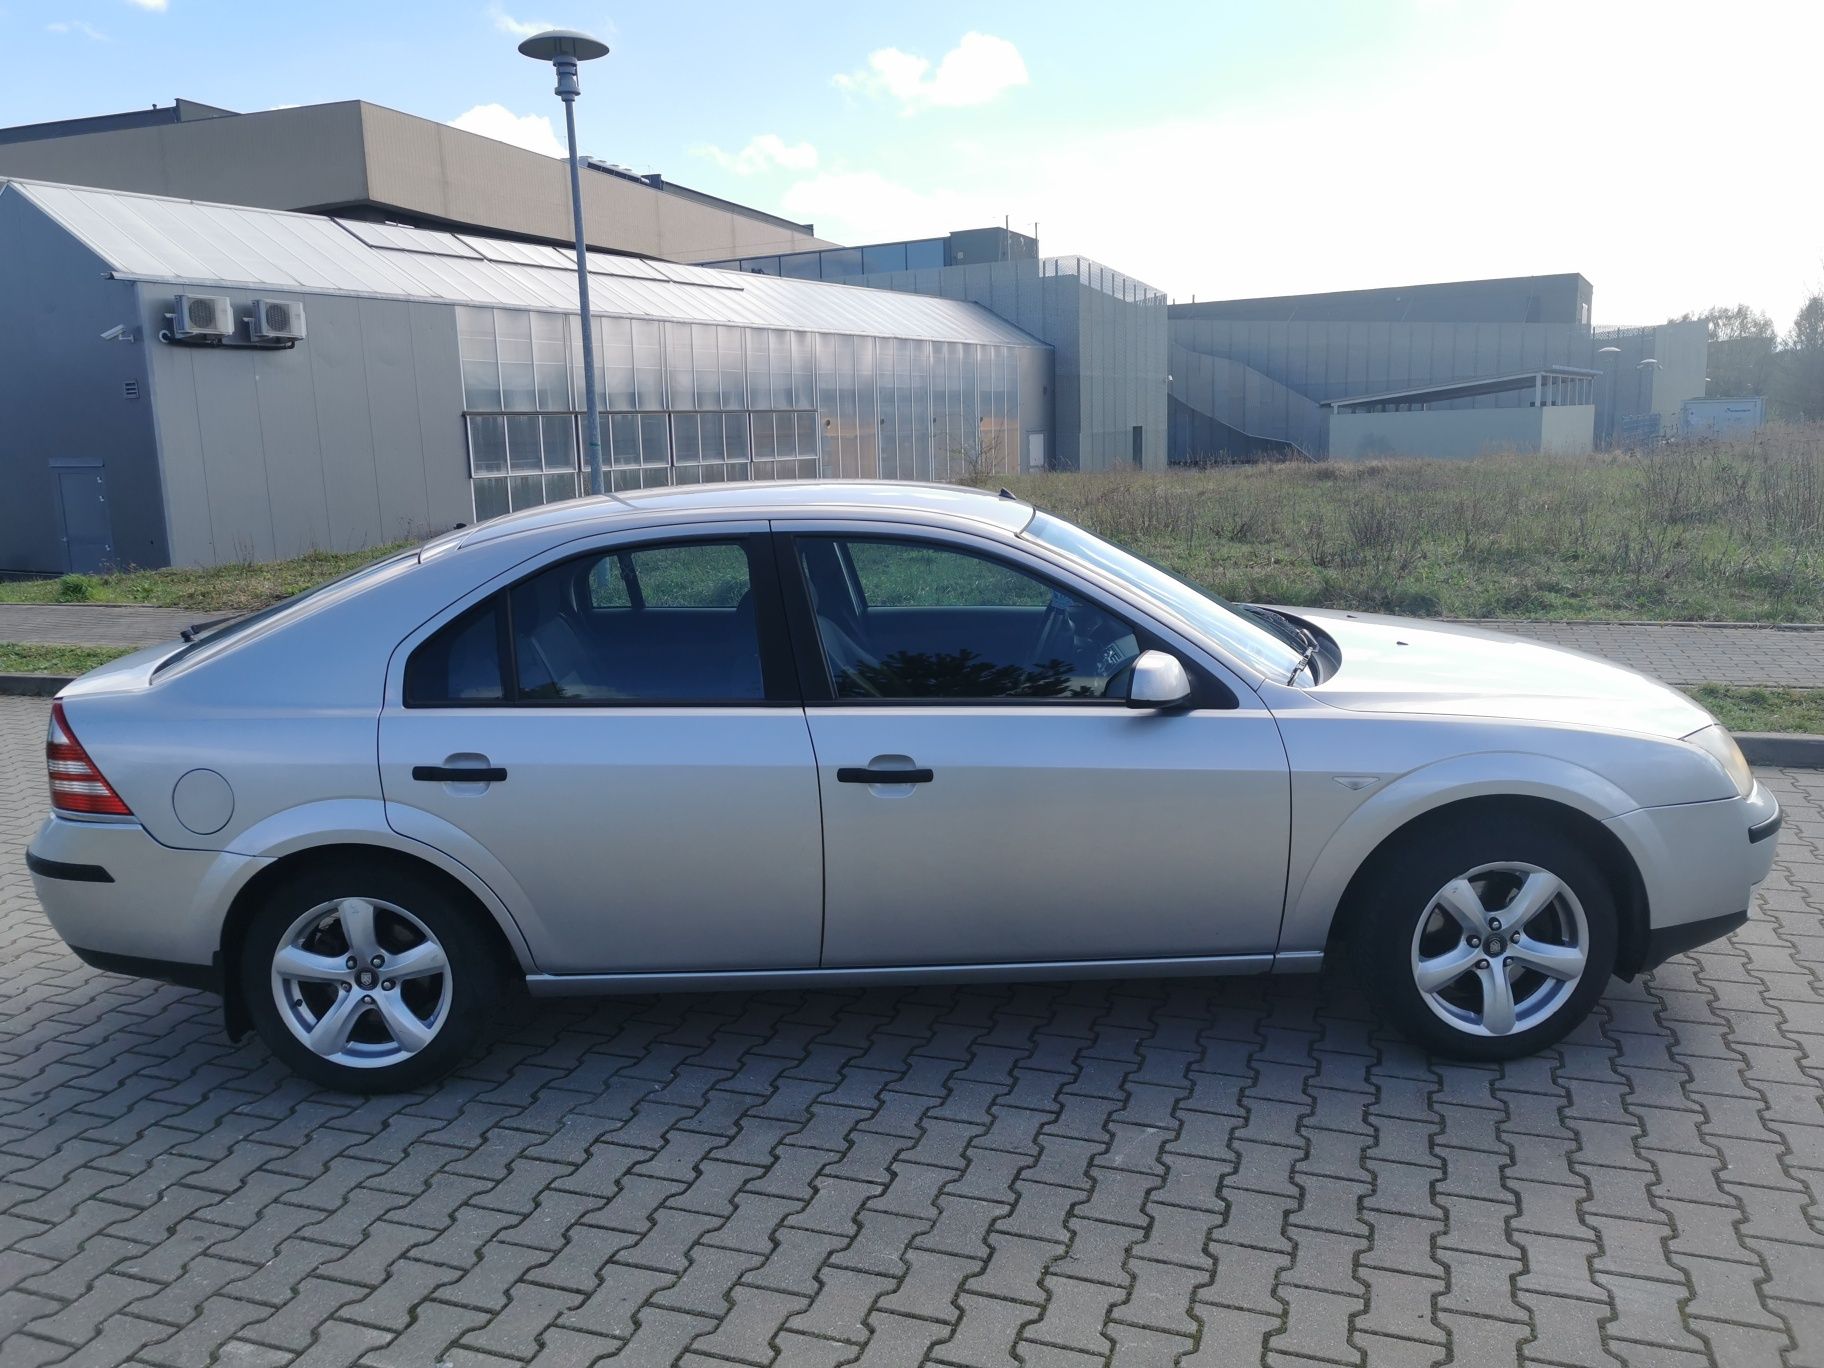 Ford Mondeo mk3 2.0